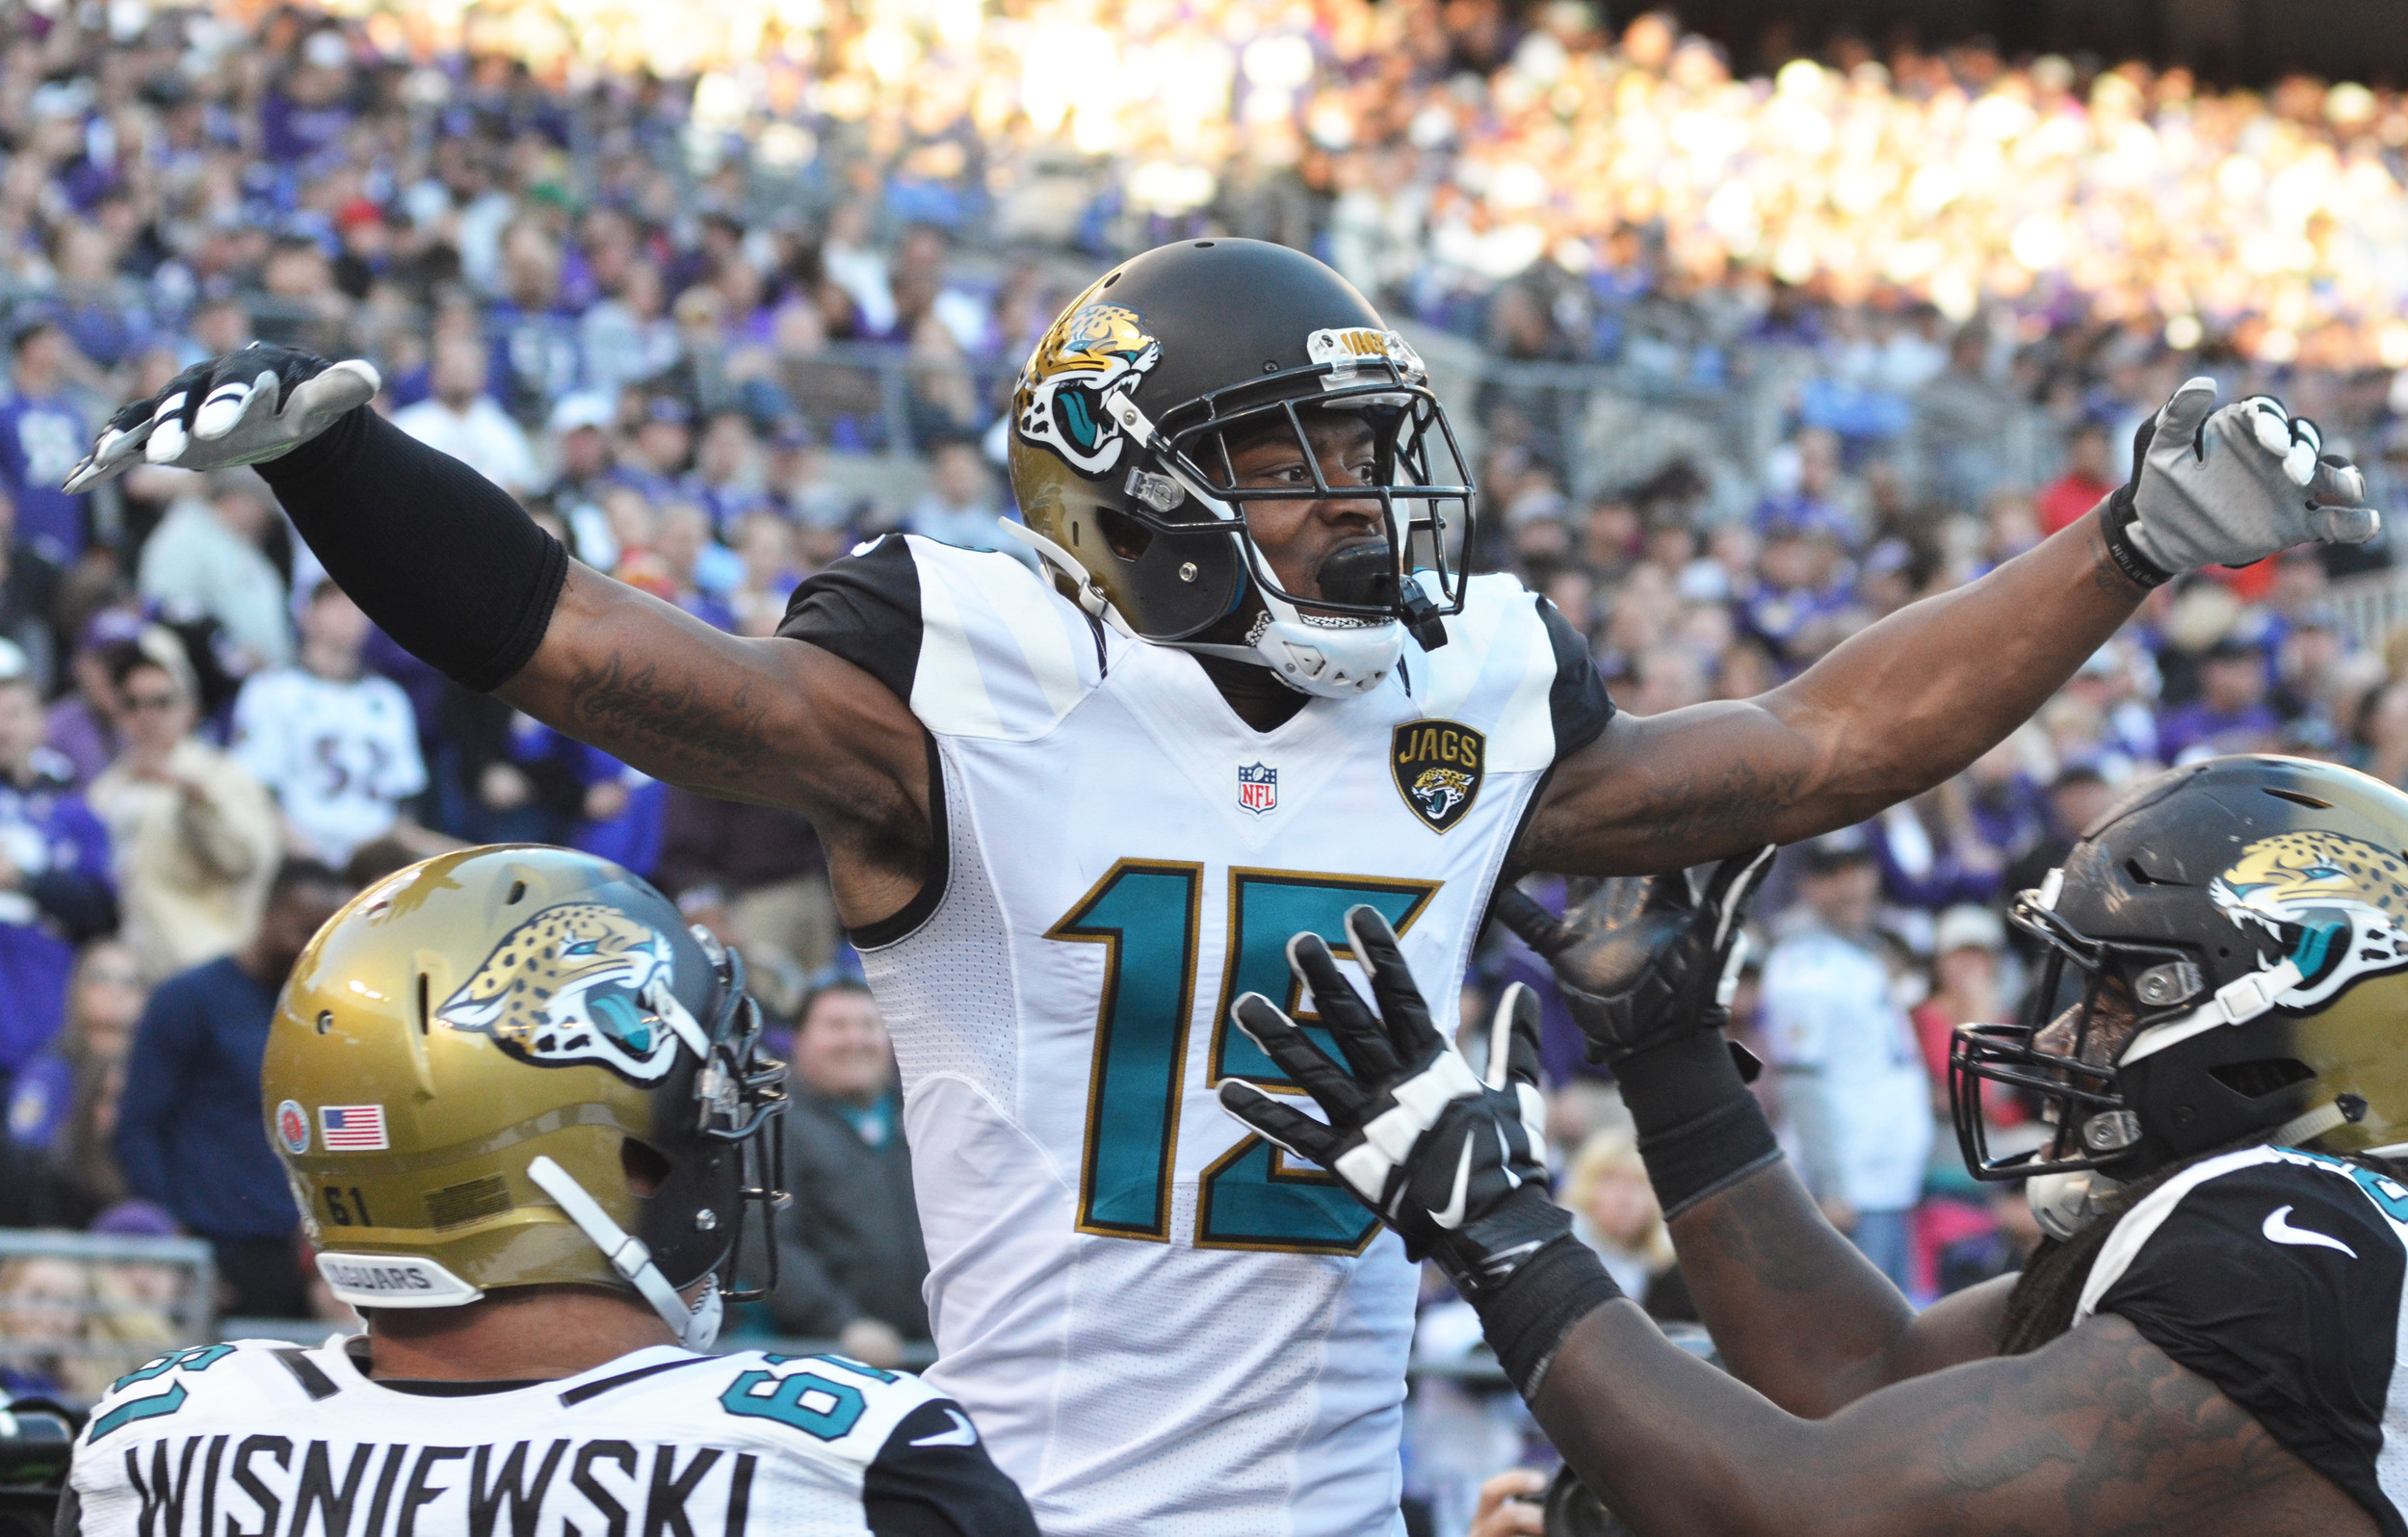 Jaguars wide receiver Allen Robinson had five catches for 51 yards with a touchdown on Sunday. With the win over Baltimore Jacksonville (3-6) snapped a 13-game losing streak on the road.